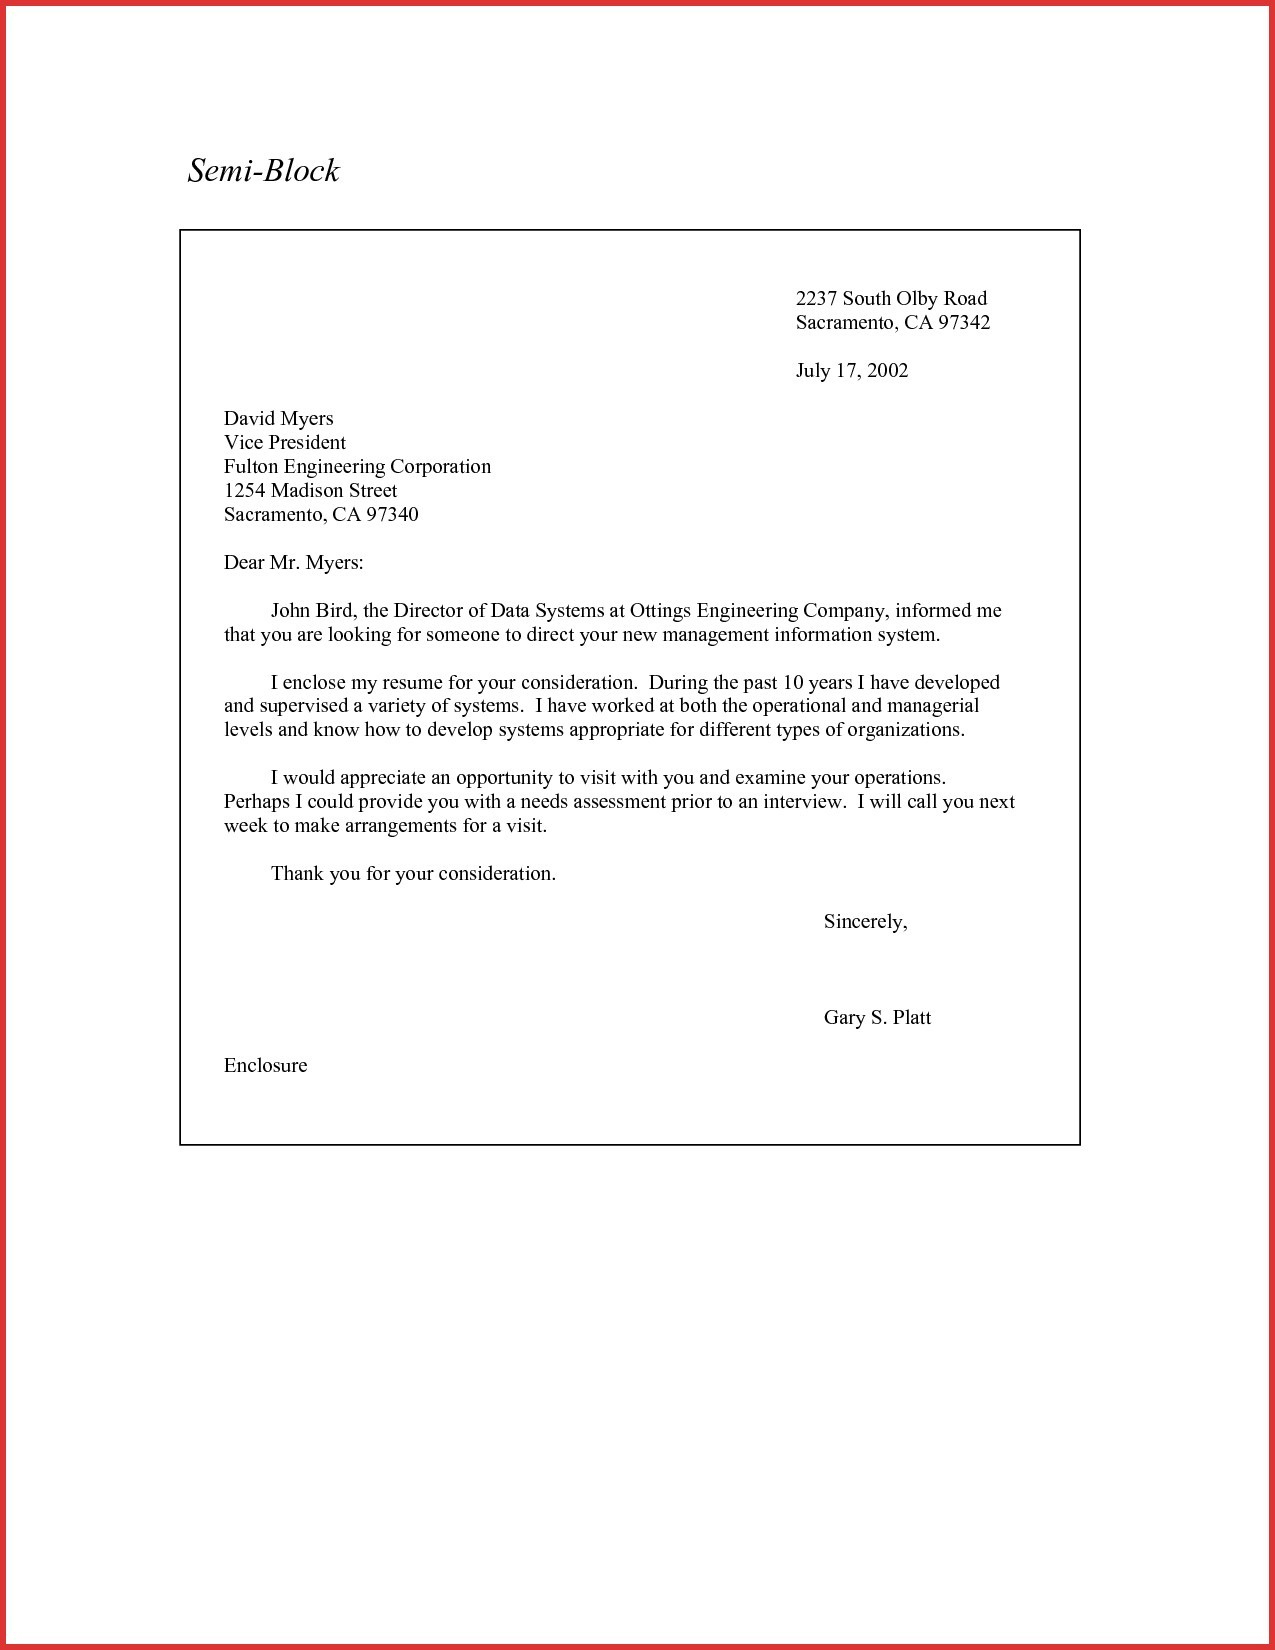 Speeding Ticket Appeal Letter Template Samples | Letter with Modified Block Letter Template Word